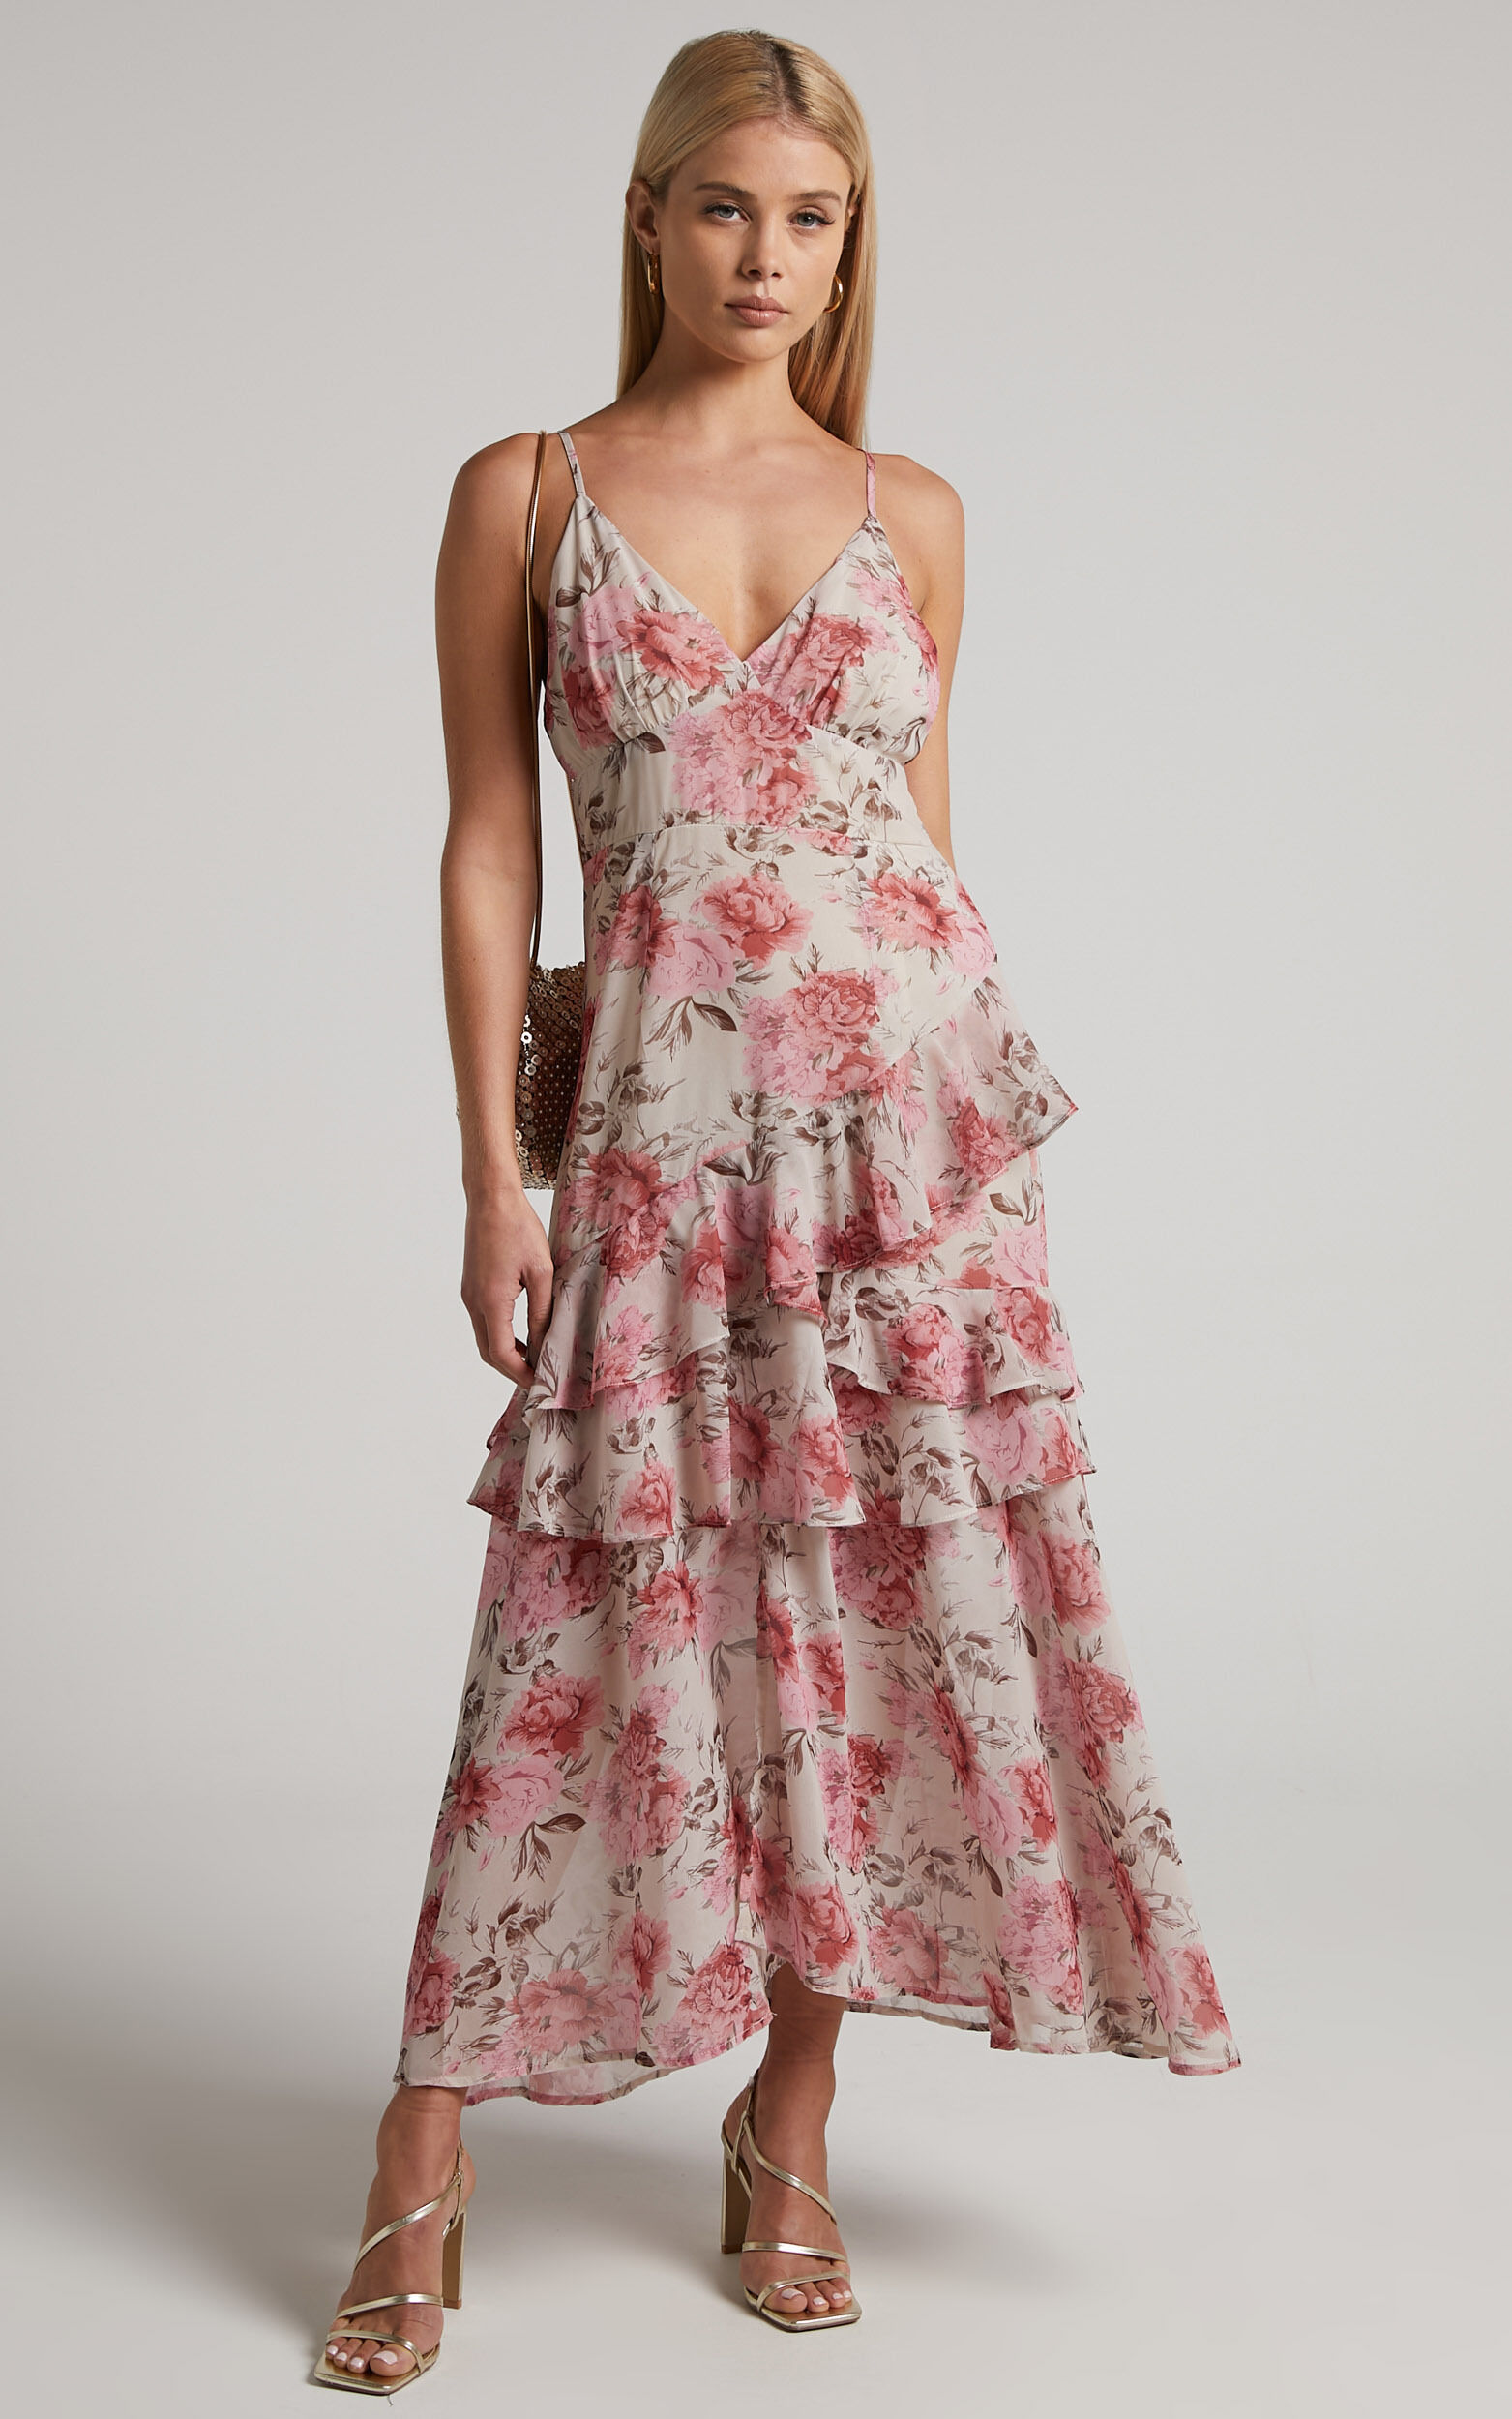 Caliope Maxi Dress - V Neck Tiered Ruffle Dress in Pink Floral - 06, PNK2